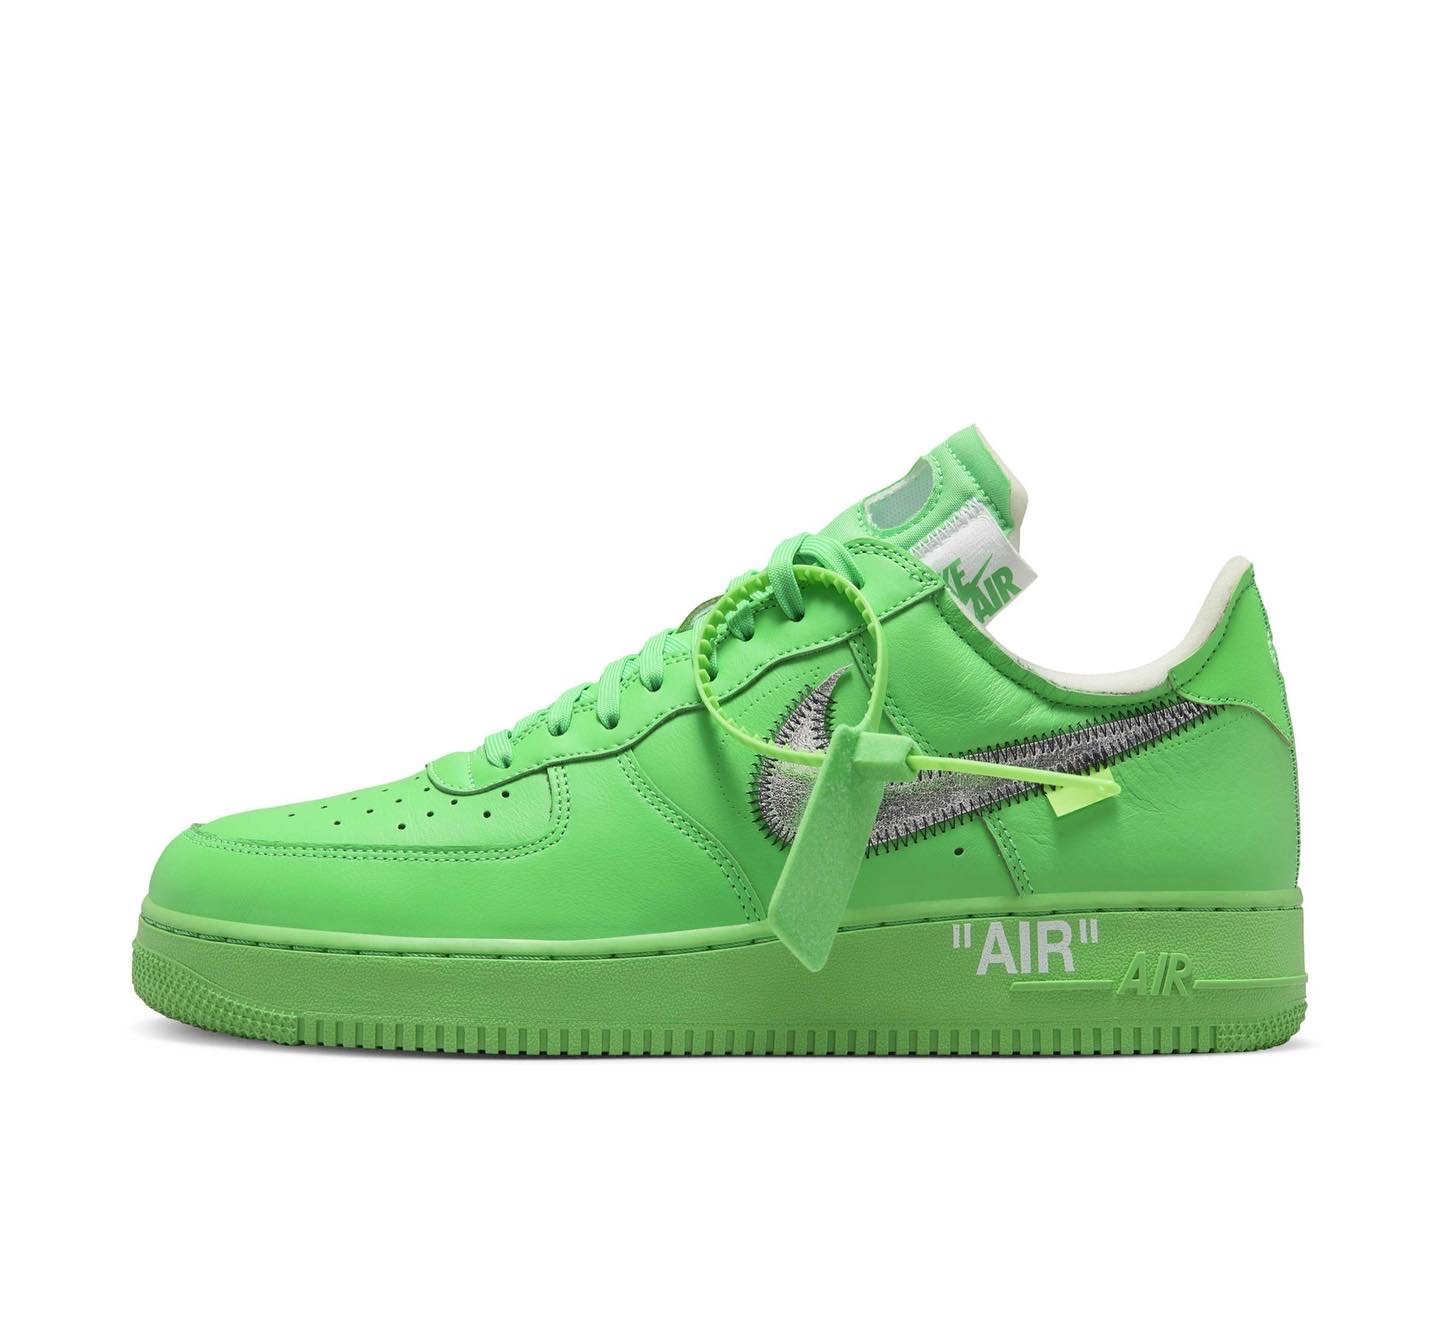 off white x nike air force 1 low light green spark dx1419 300